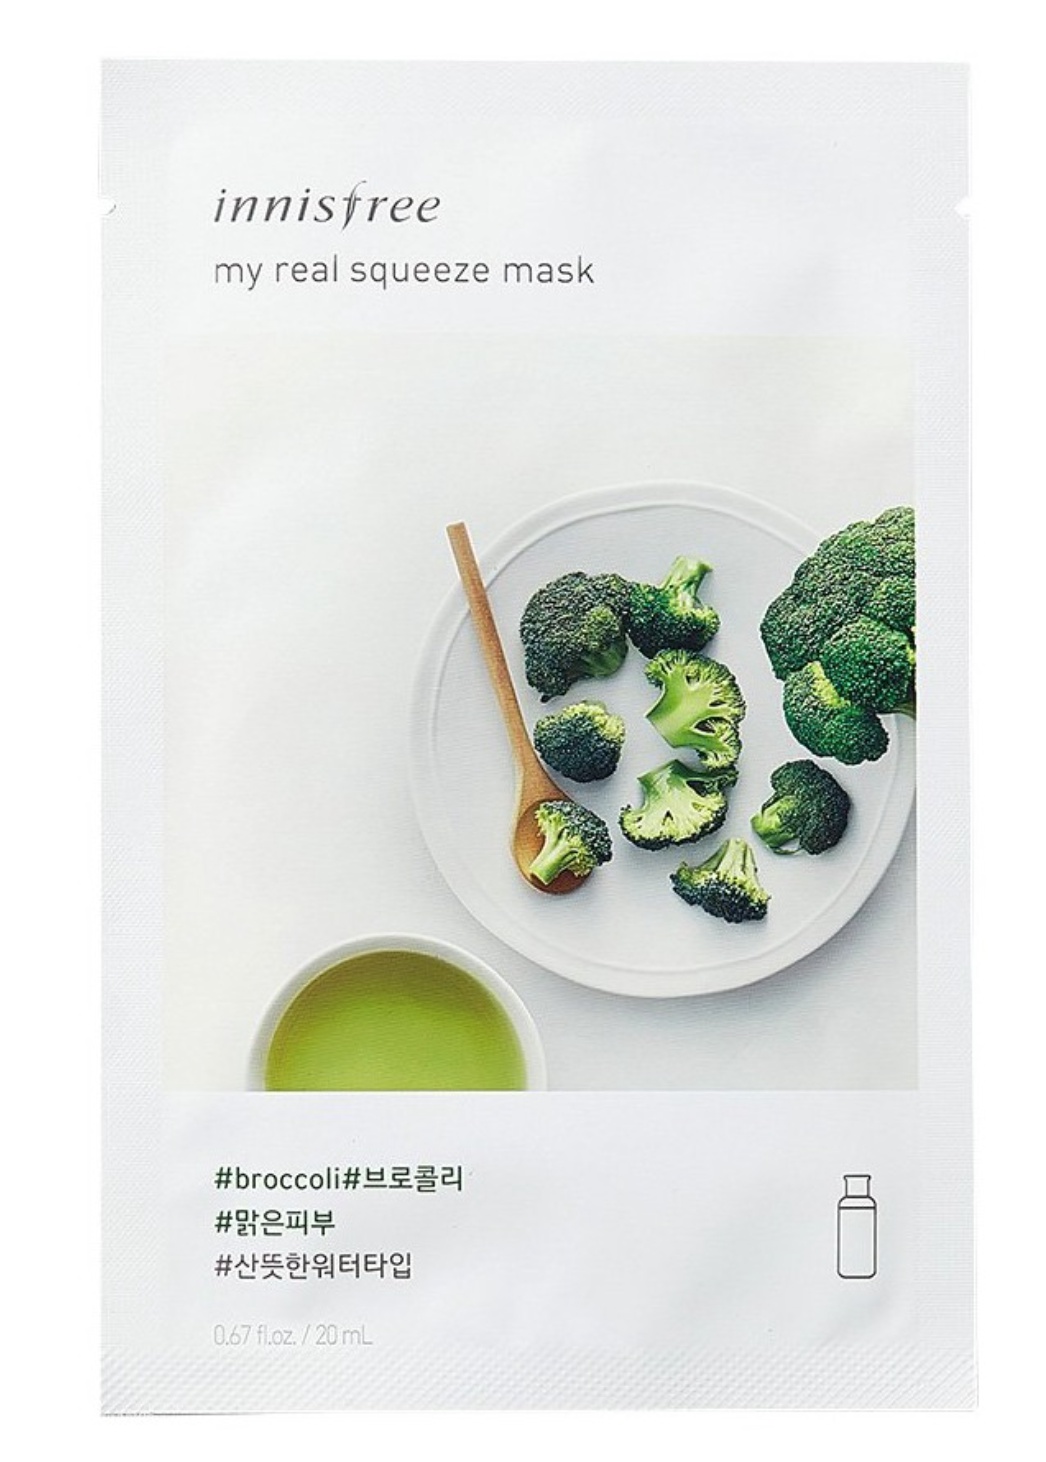 innisfree My Real Squeeze Mask Broccoli